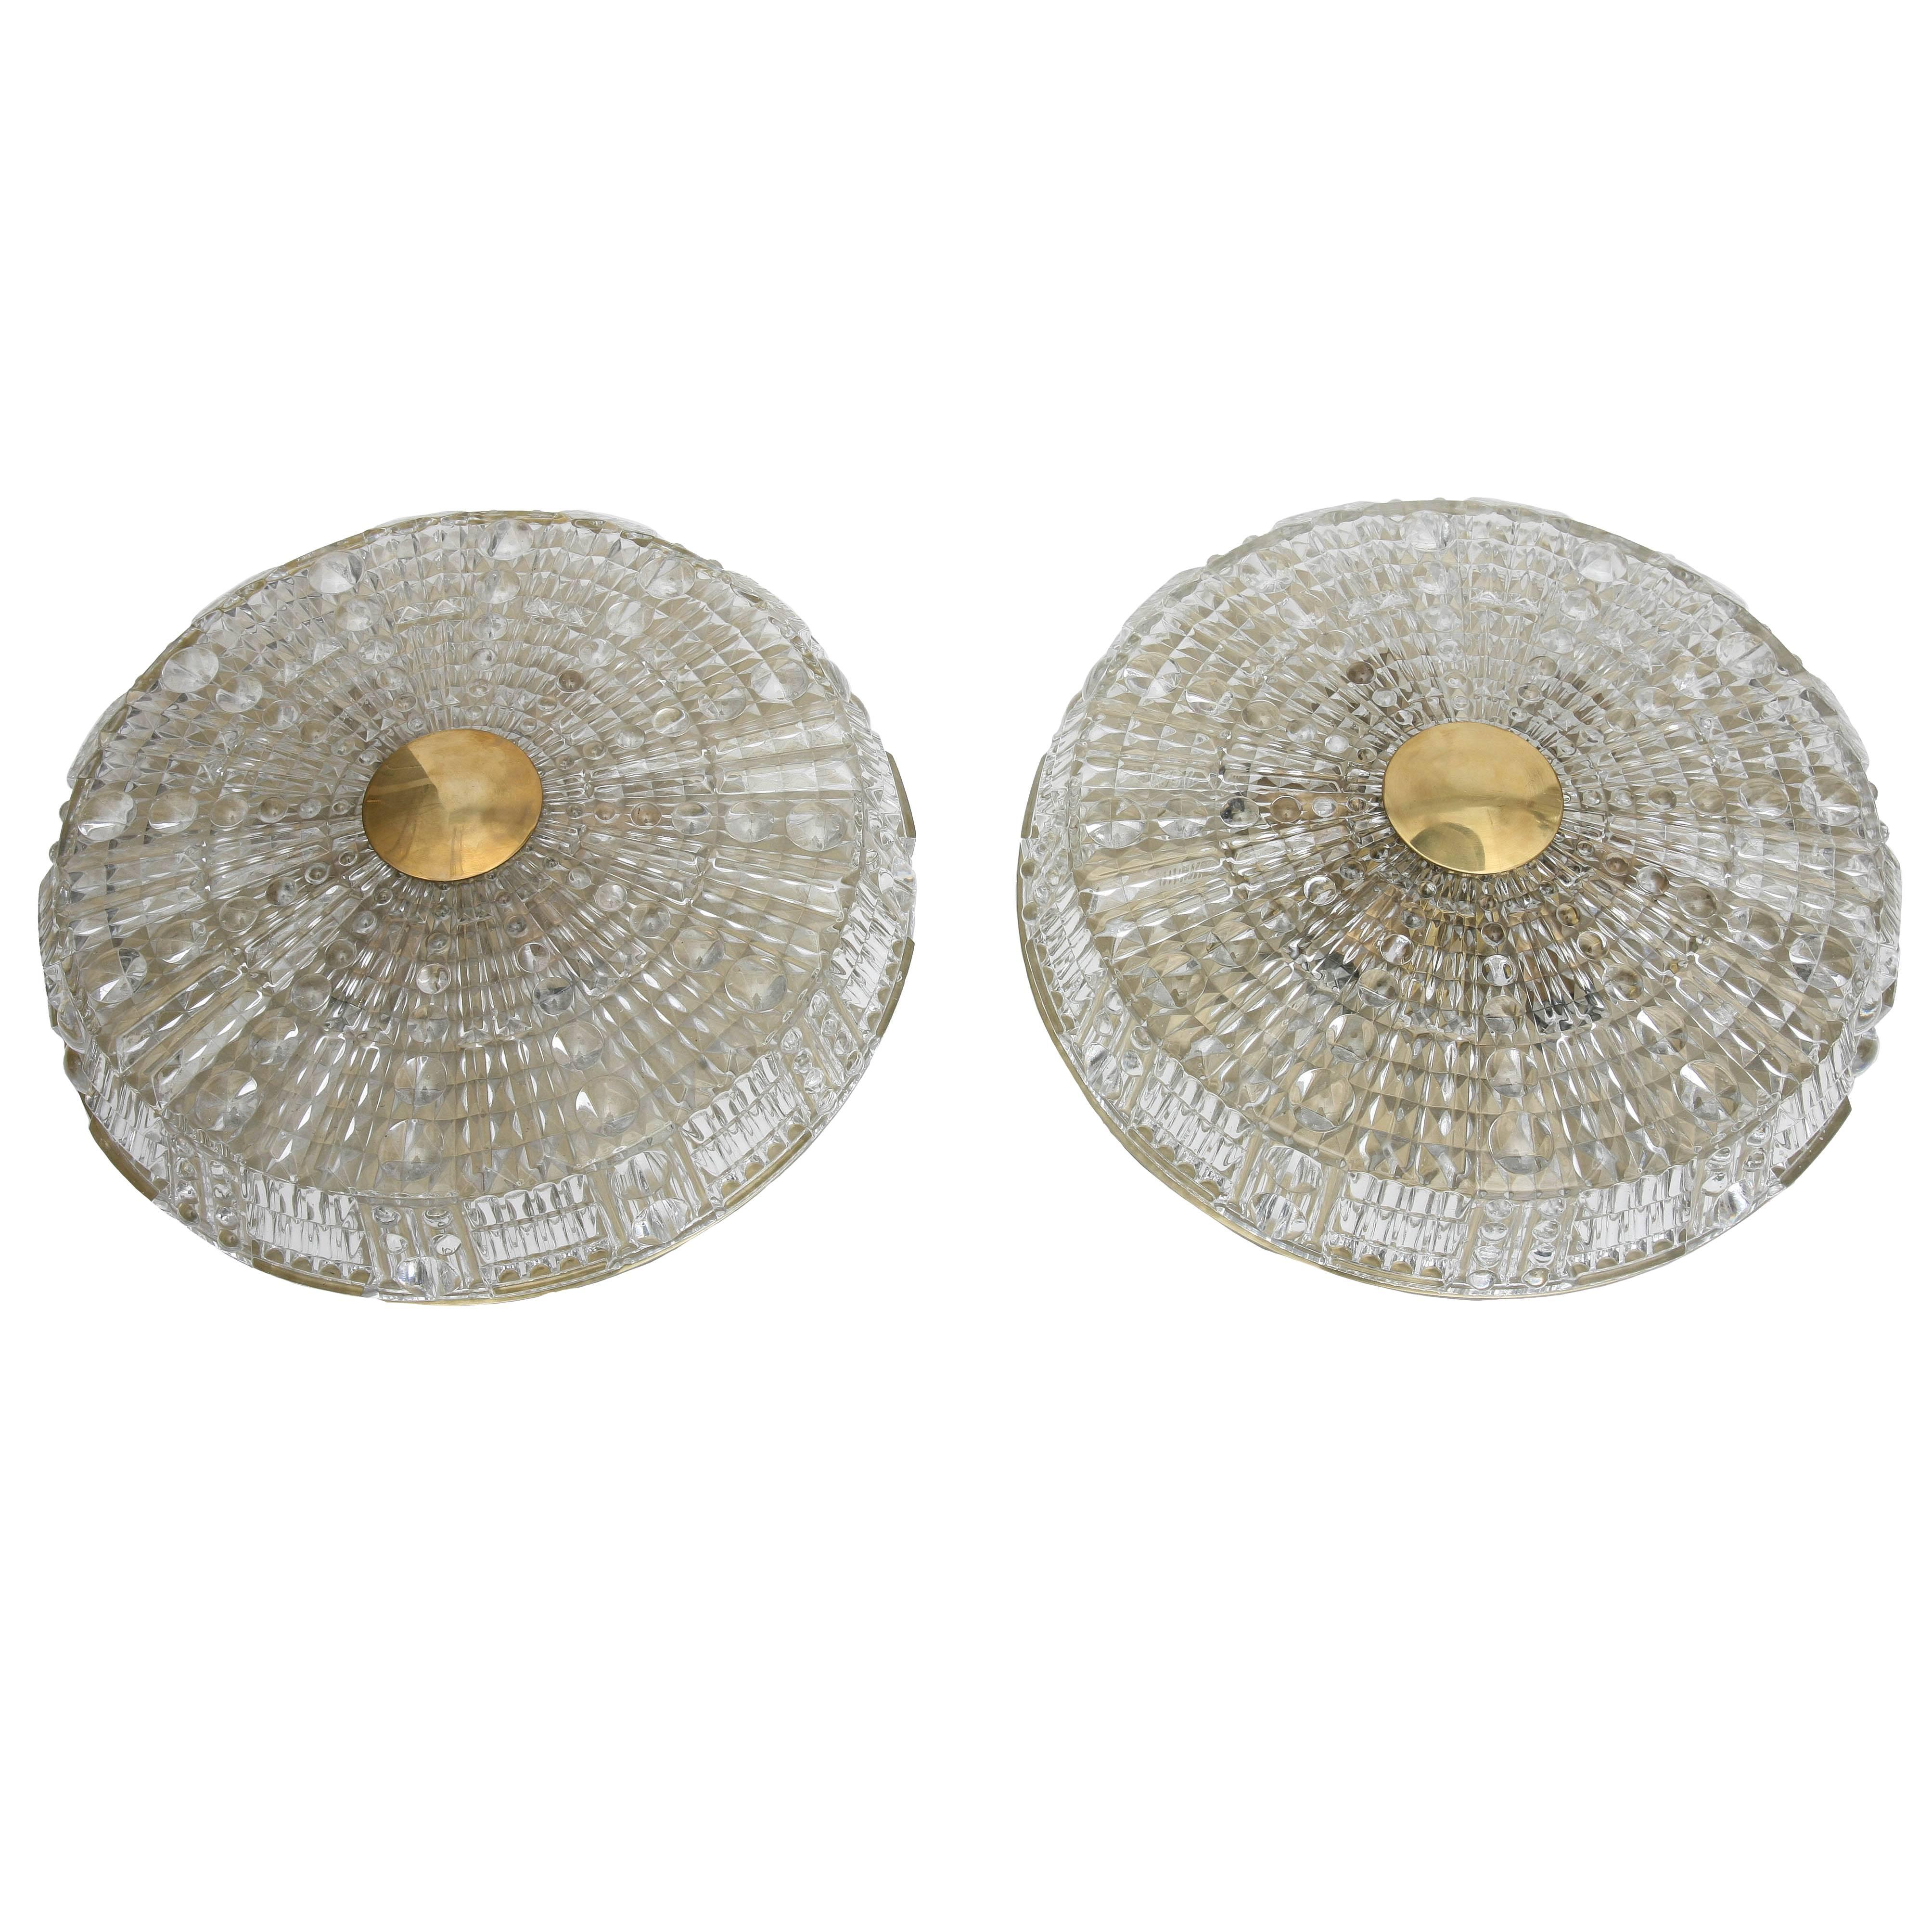 Pair of Orrefors Crystal Flush Mount Light Fixtures by Carl Fagerlund, 1960s